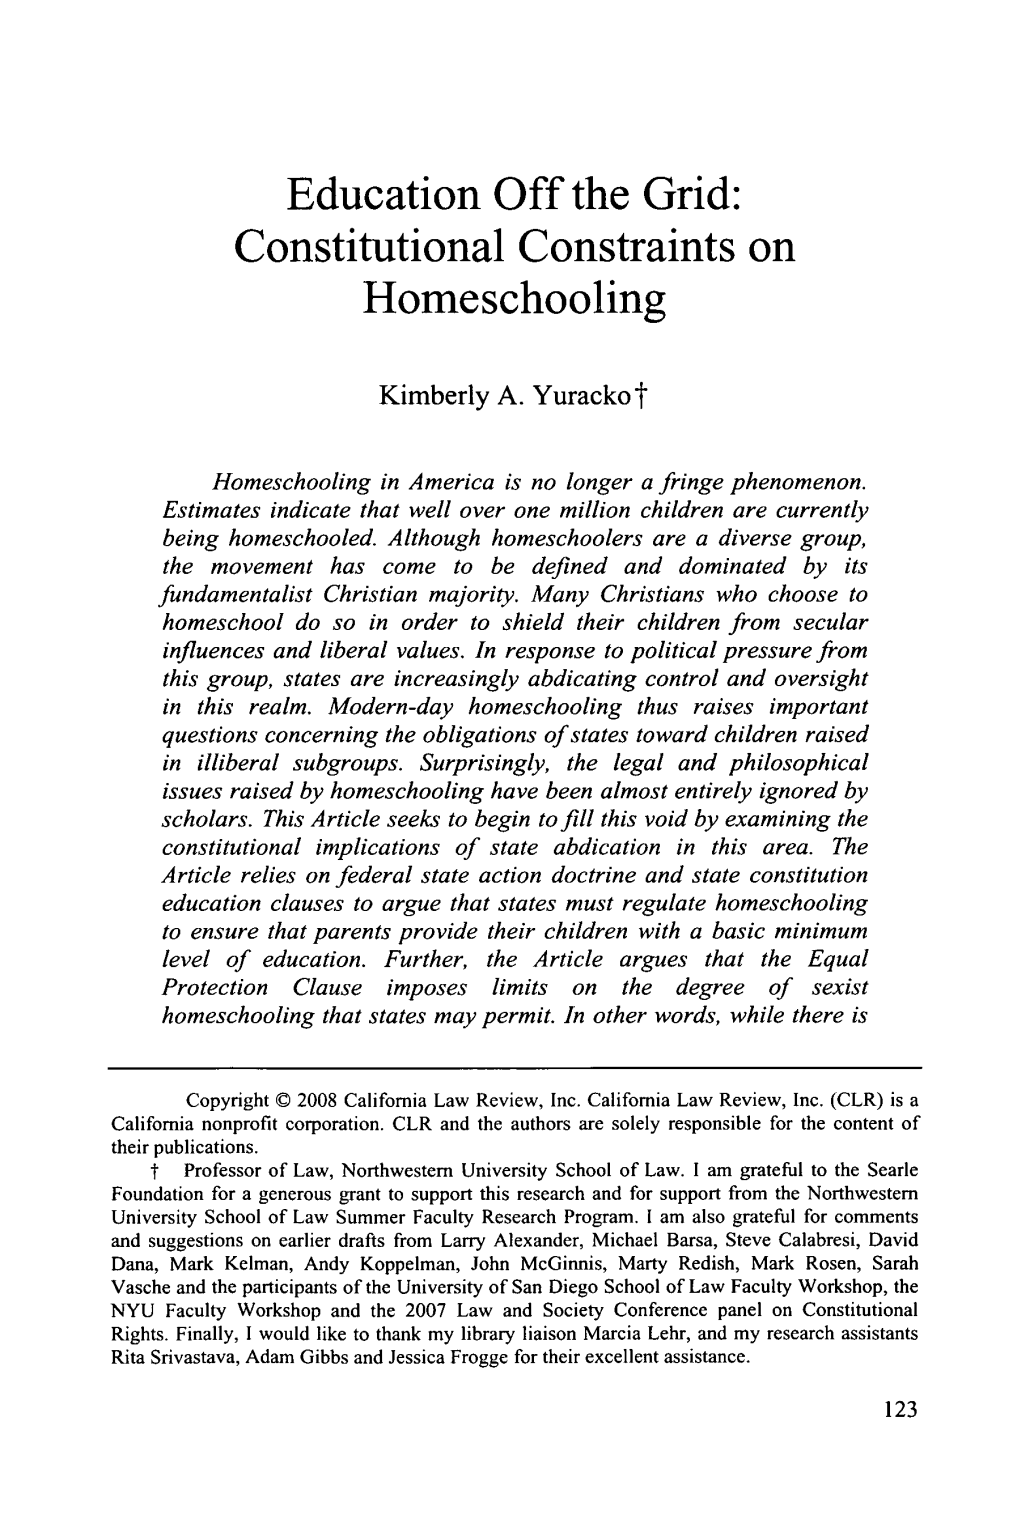 Education Off the Grid: Constitutional Constraints on Homeschooling